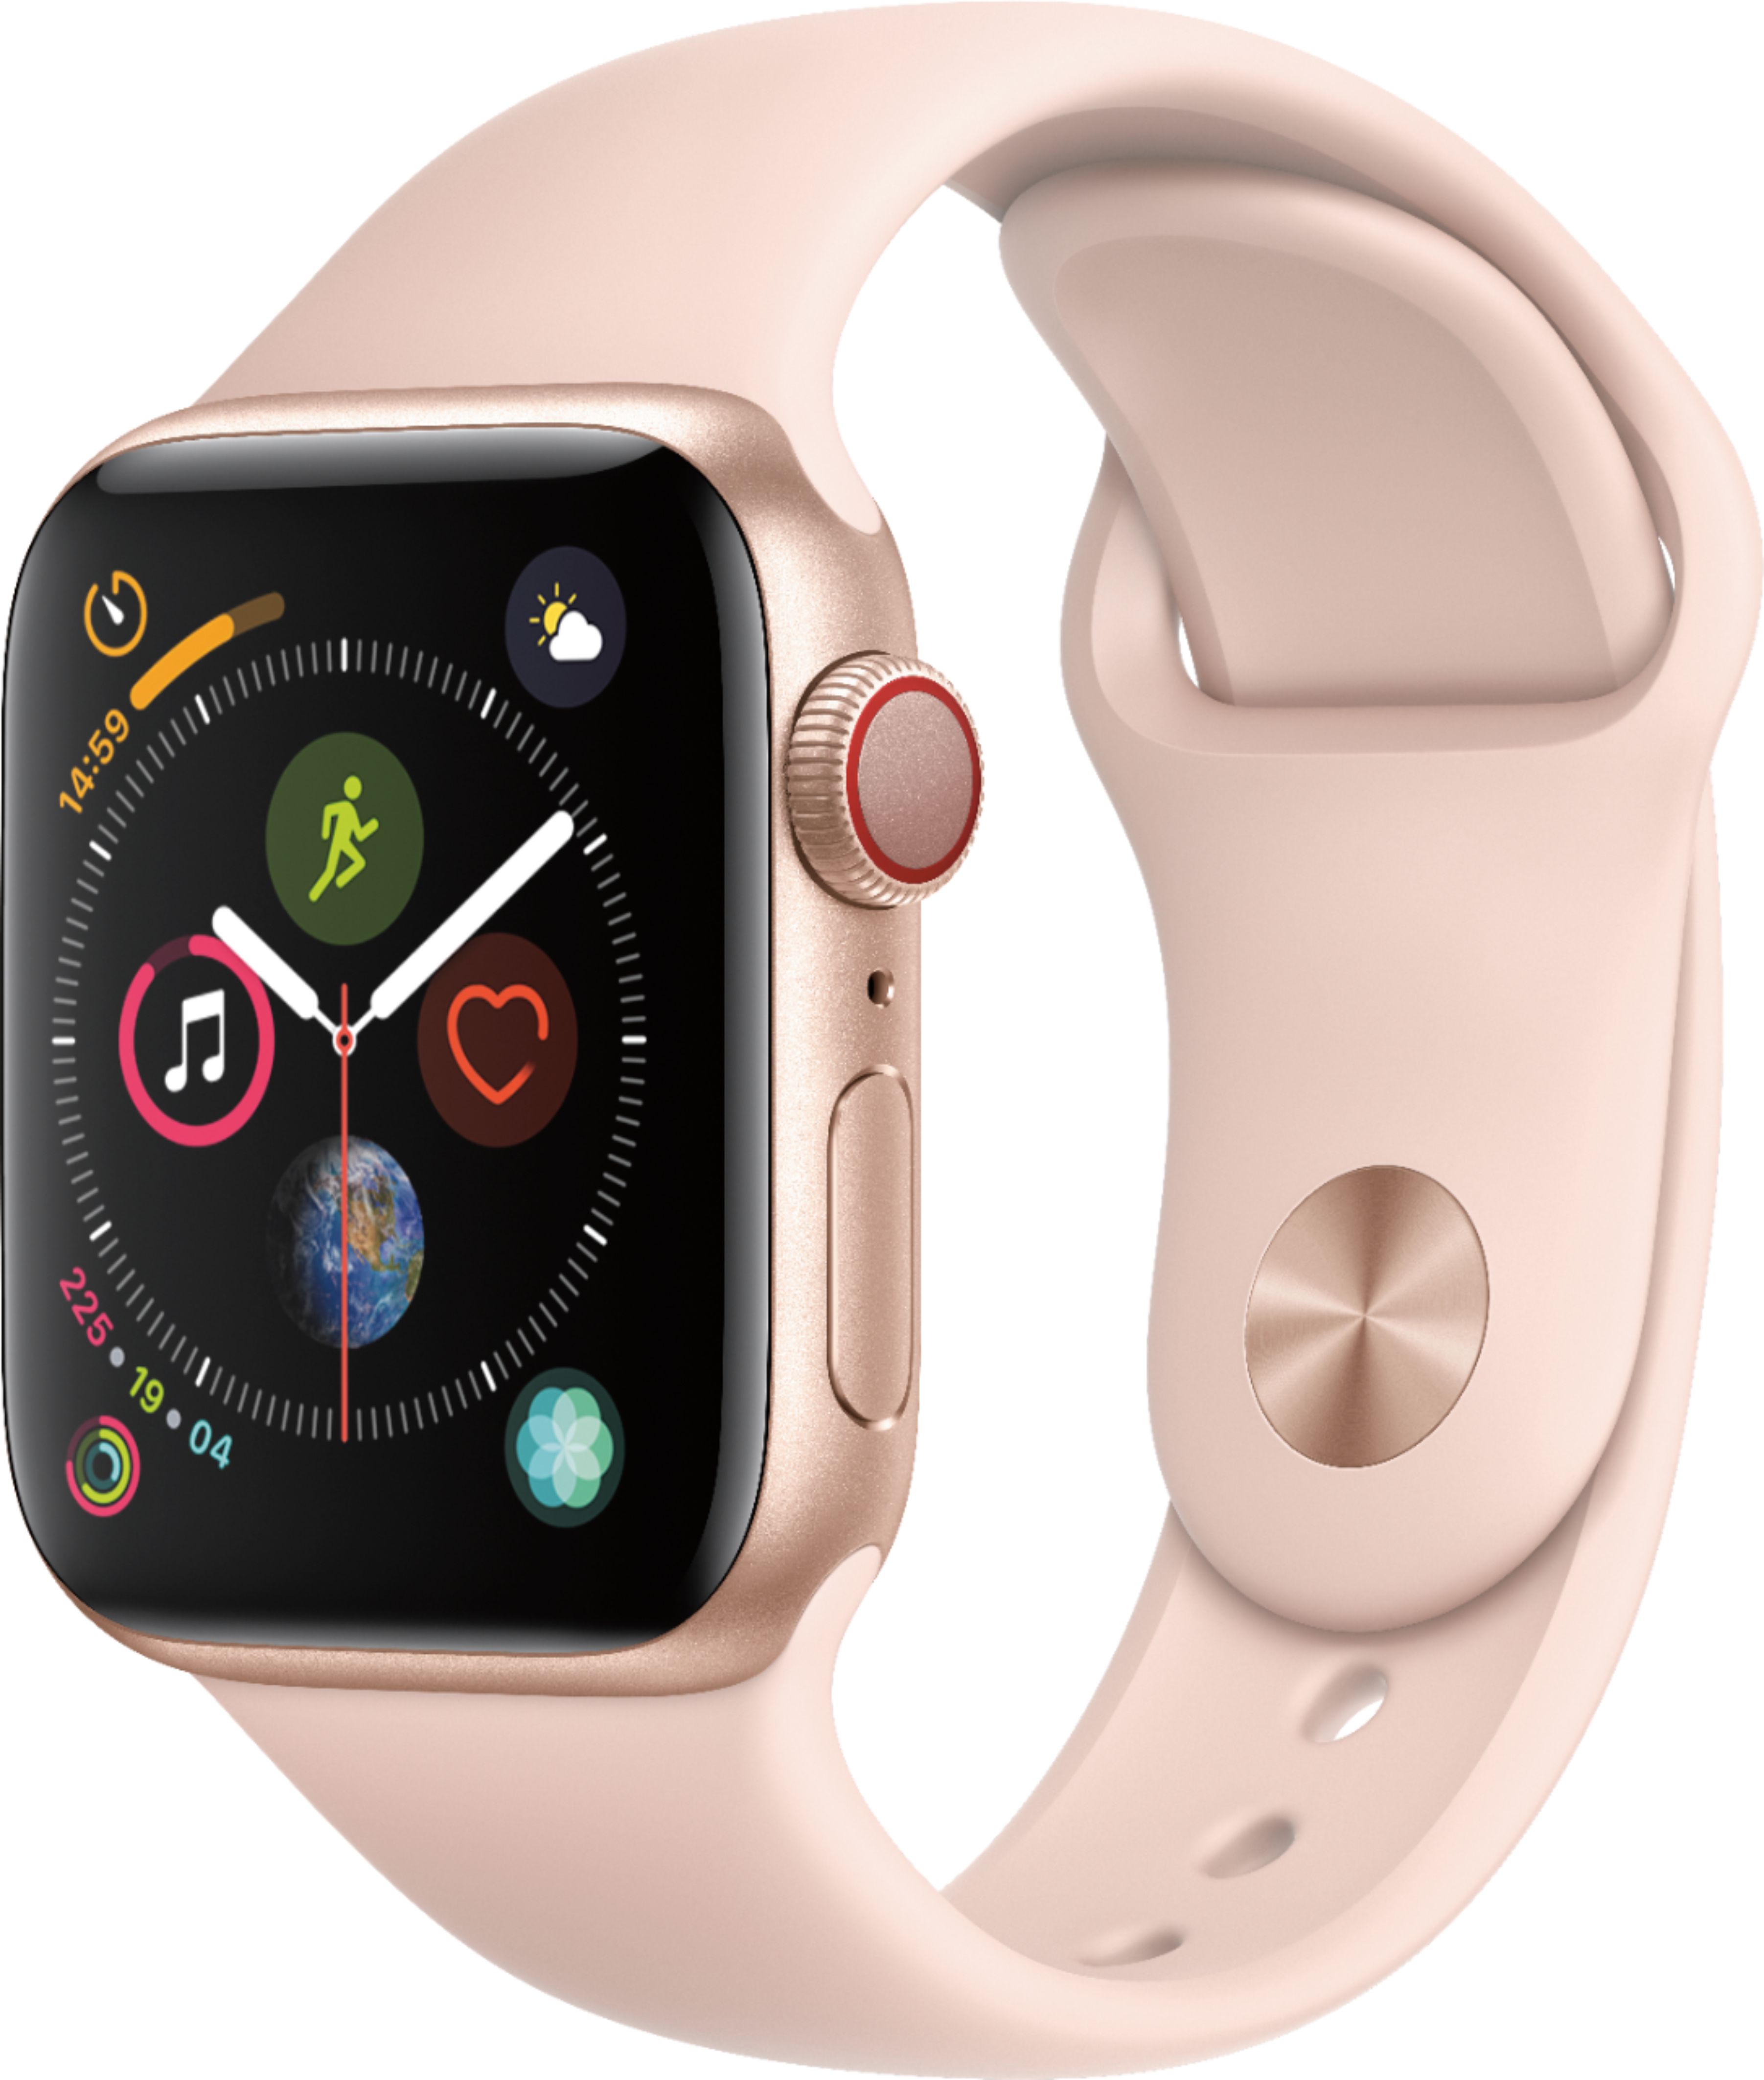 Apple - Apple Watch Series 4 (GPS + Cellular) 40mm Gold Aluminum Case with Pink Sand Sport Band - Gold Aluminum